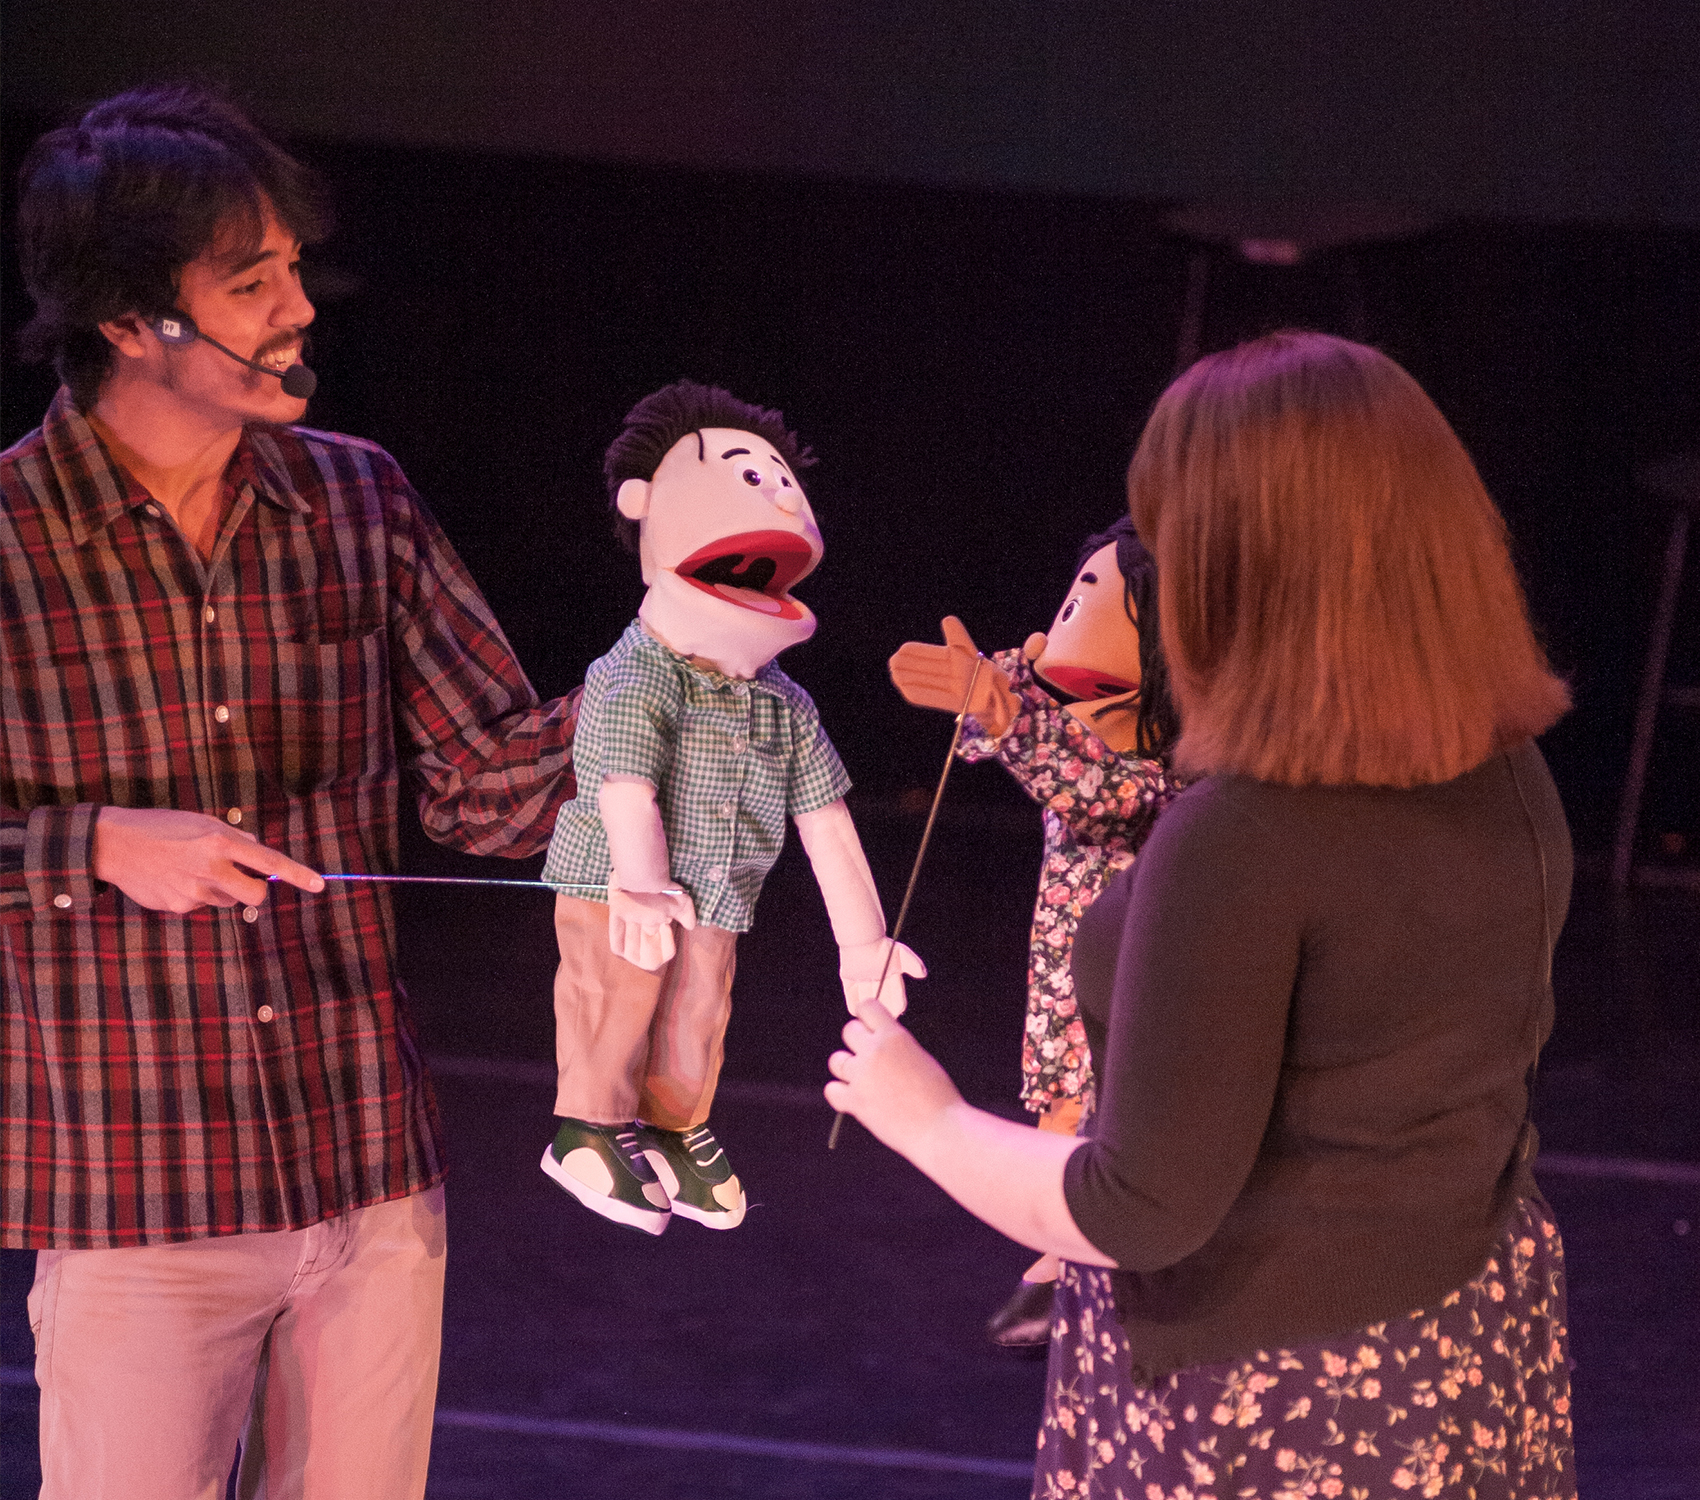 The camera is angled from above, and its placed on a young man and the back of a woman. Each of them holds a puppet dressed in a similar fashion to their outfits: the woman decked in a floral dress and a black cardigan, the man in a plaid long sleeve shirt and khaki pants. 